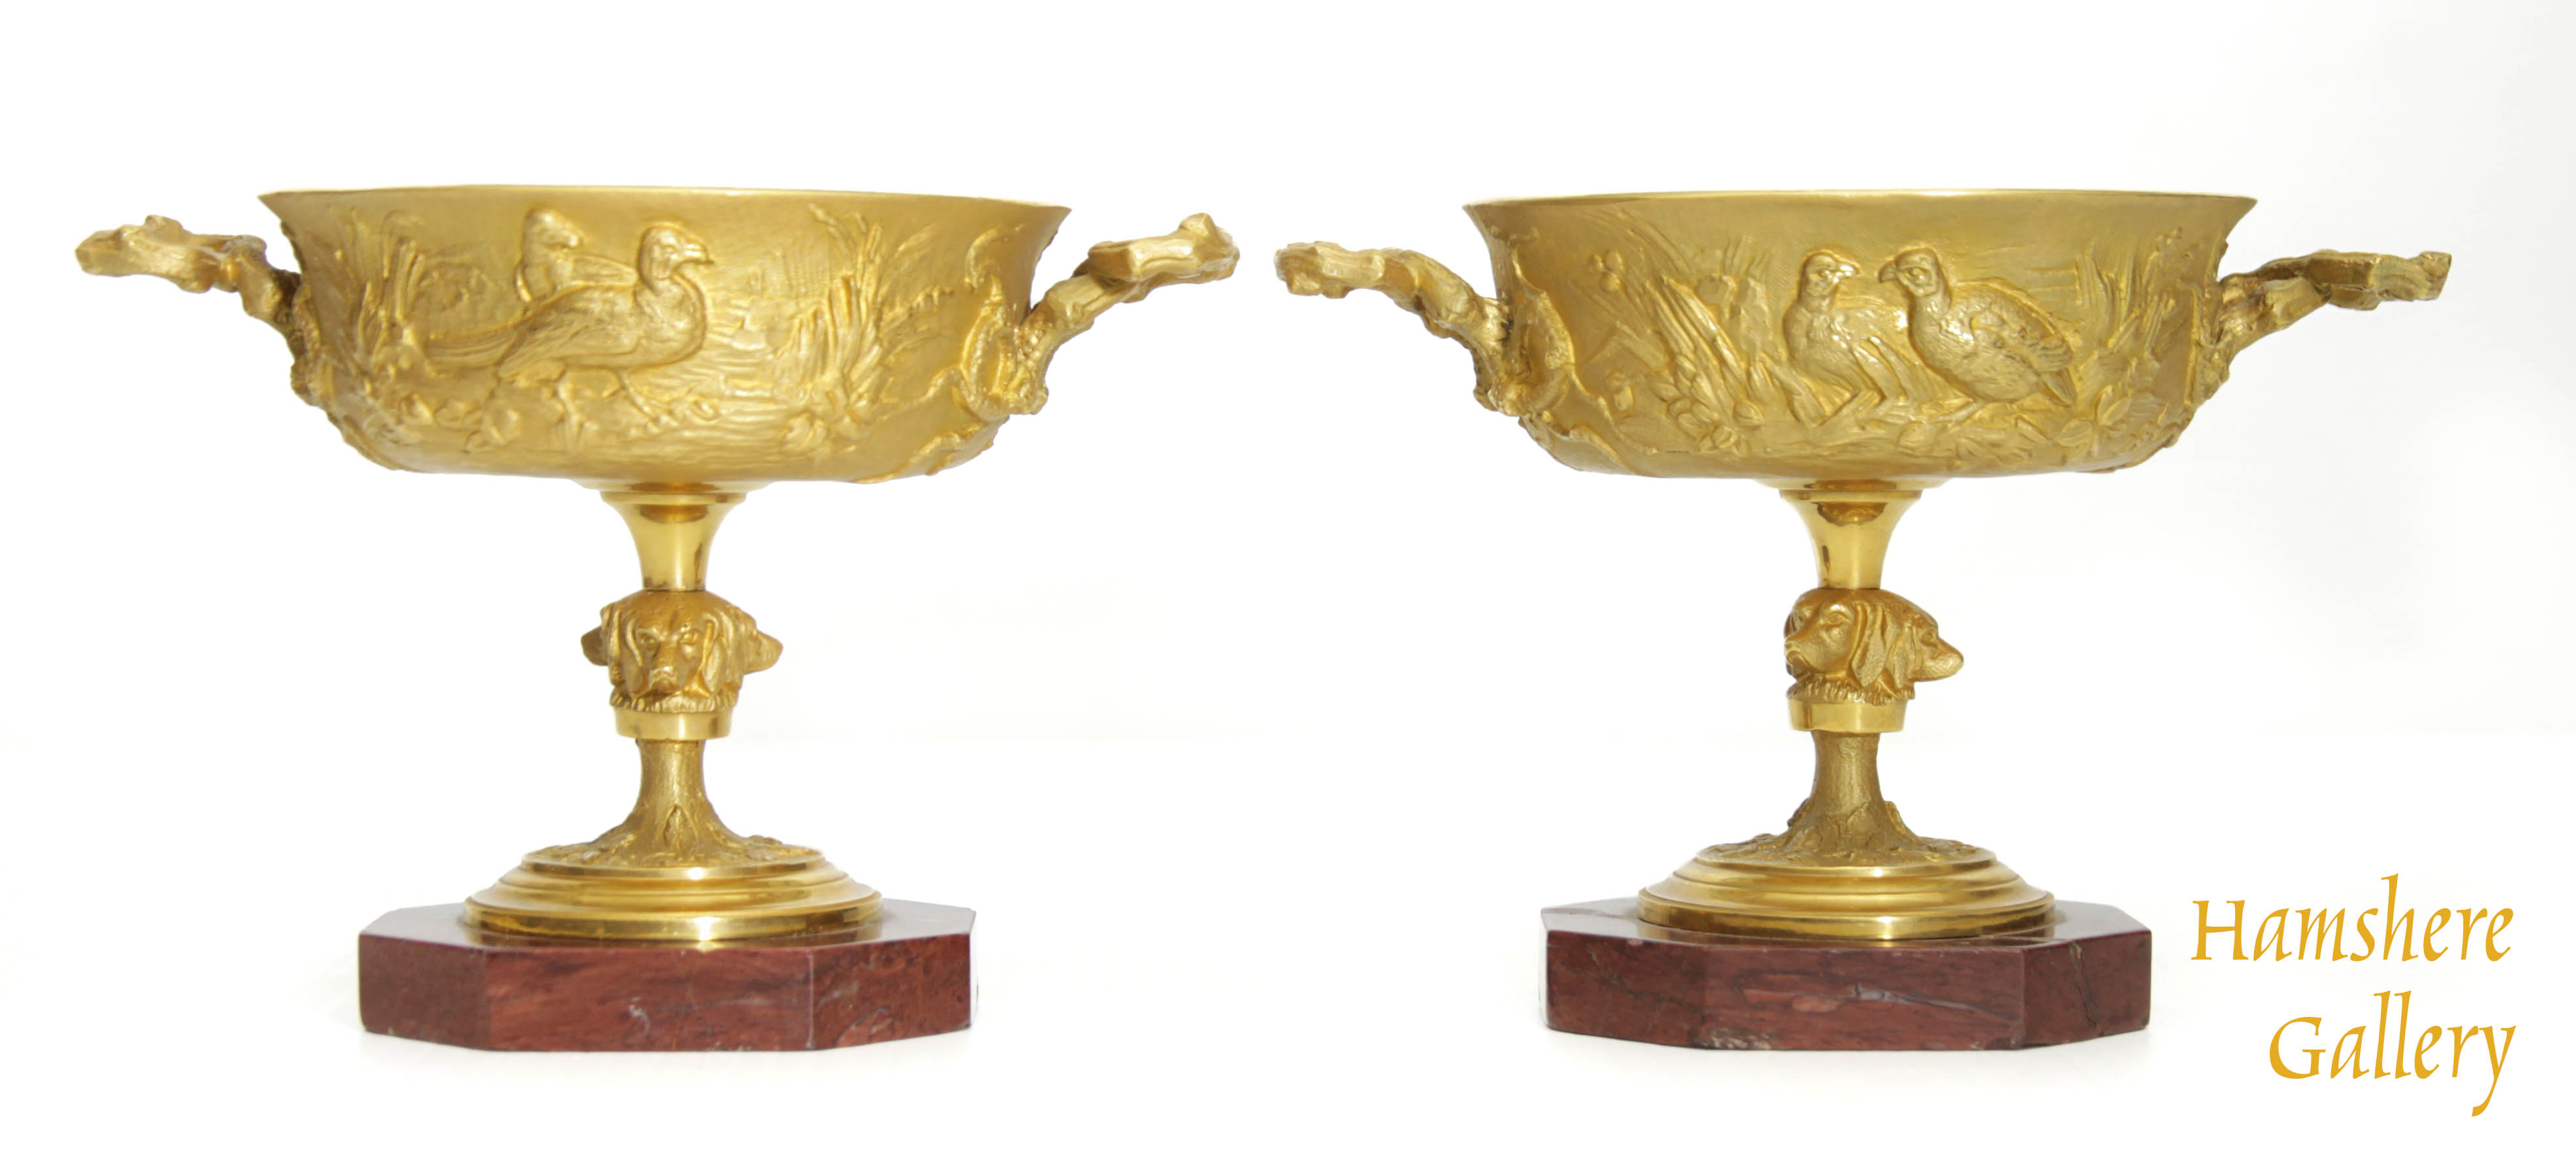 Click to see full size: A pair of bronze doré hunting / chasse, tazza / coupes of partridge, pheasants, Setter / hounds attributable to Christophe Fratin (French, 1800-1864)- A pair of bronze doré hunting / chasse, tazza / coupes of partridge, pheasants, Setter / hounds attributable to Christophe Fratin (French, 1800-1864)